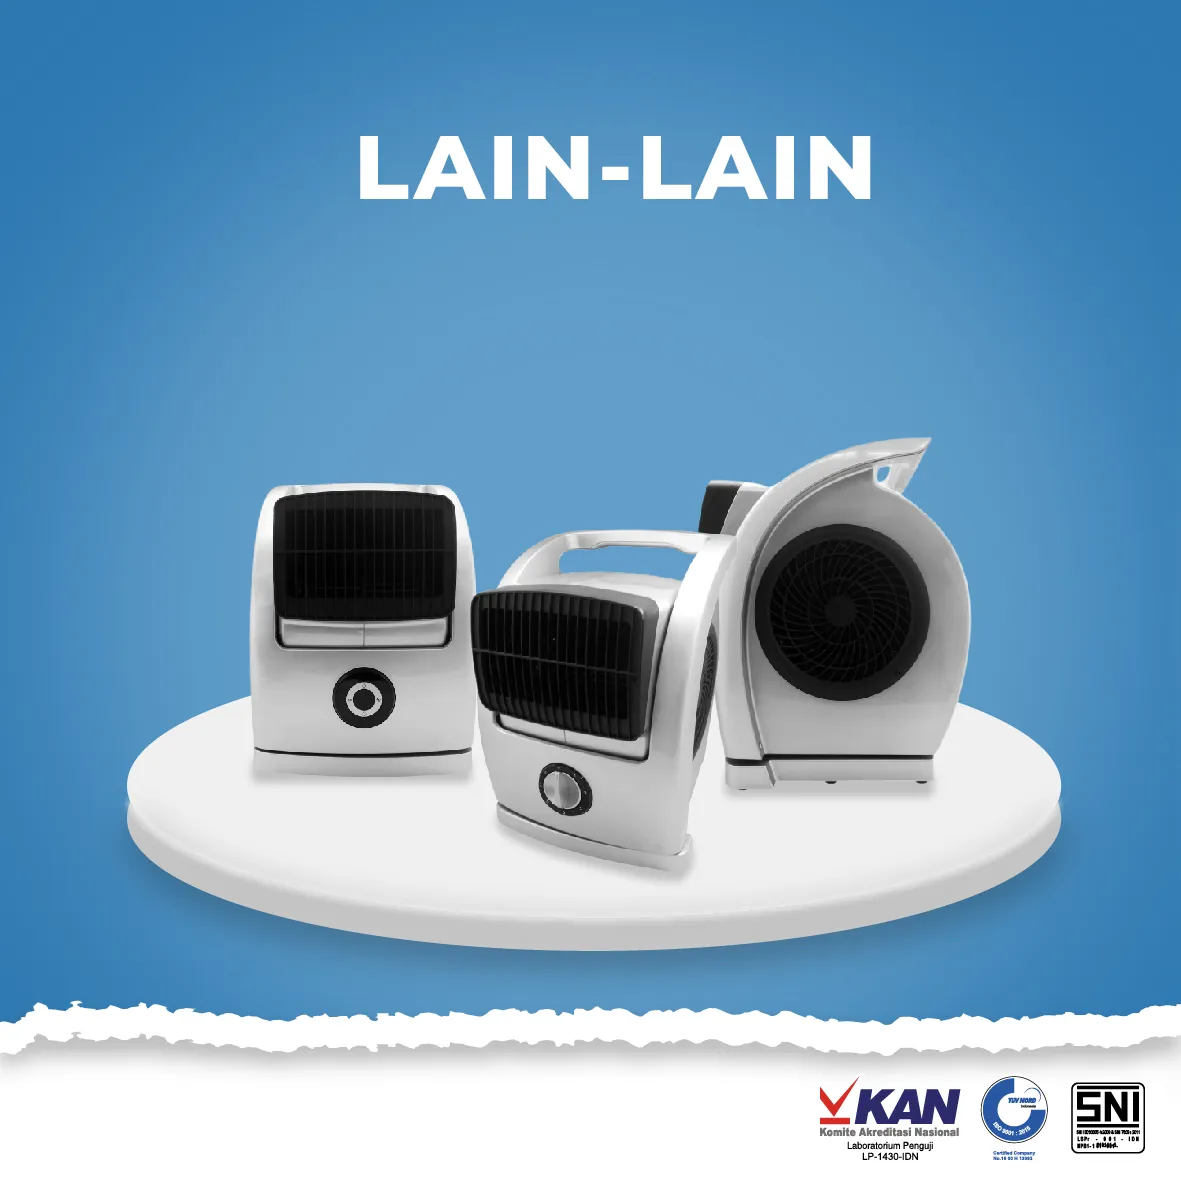  Lain-Lain other fan template cover website 05